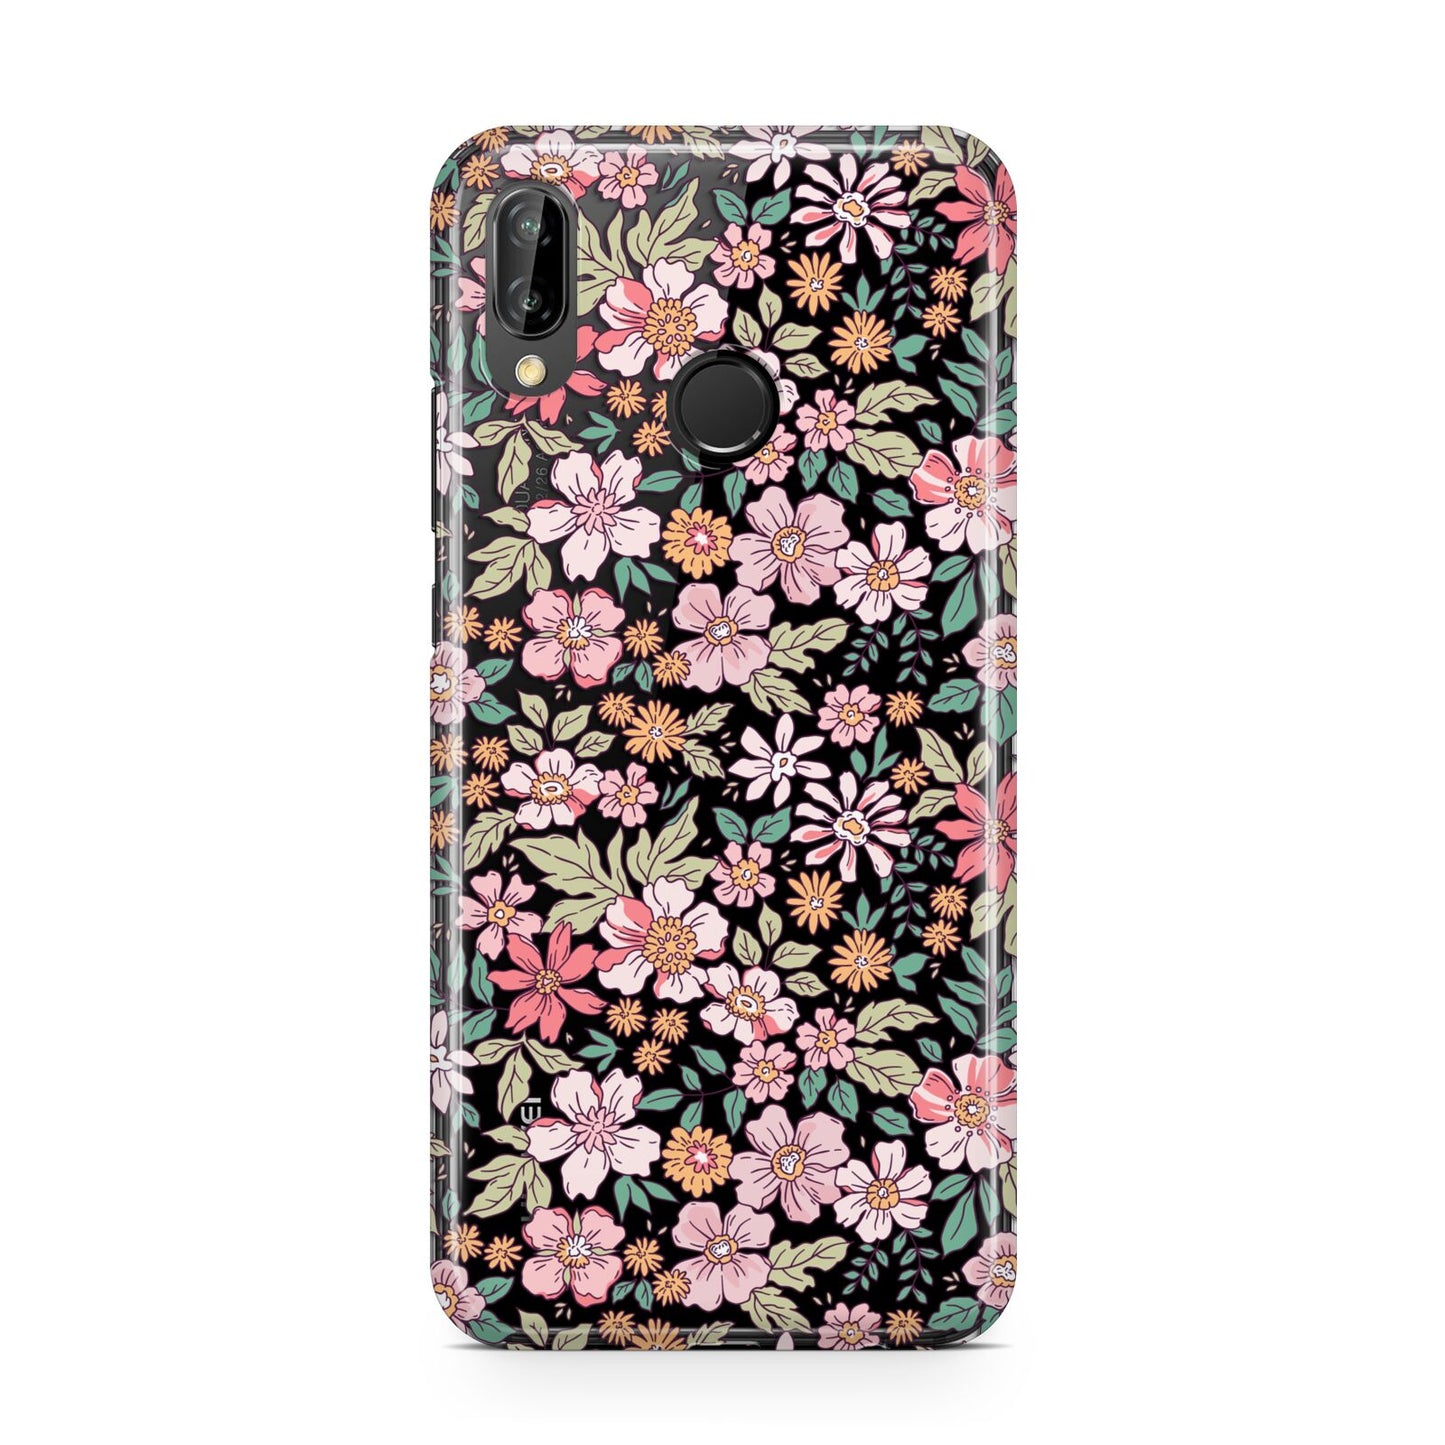 Small Floral Pattern Huawei P20 Lite Phone Case